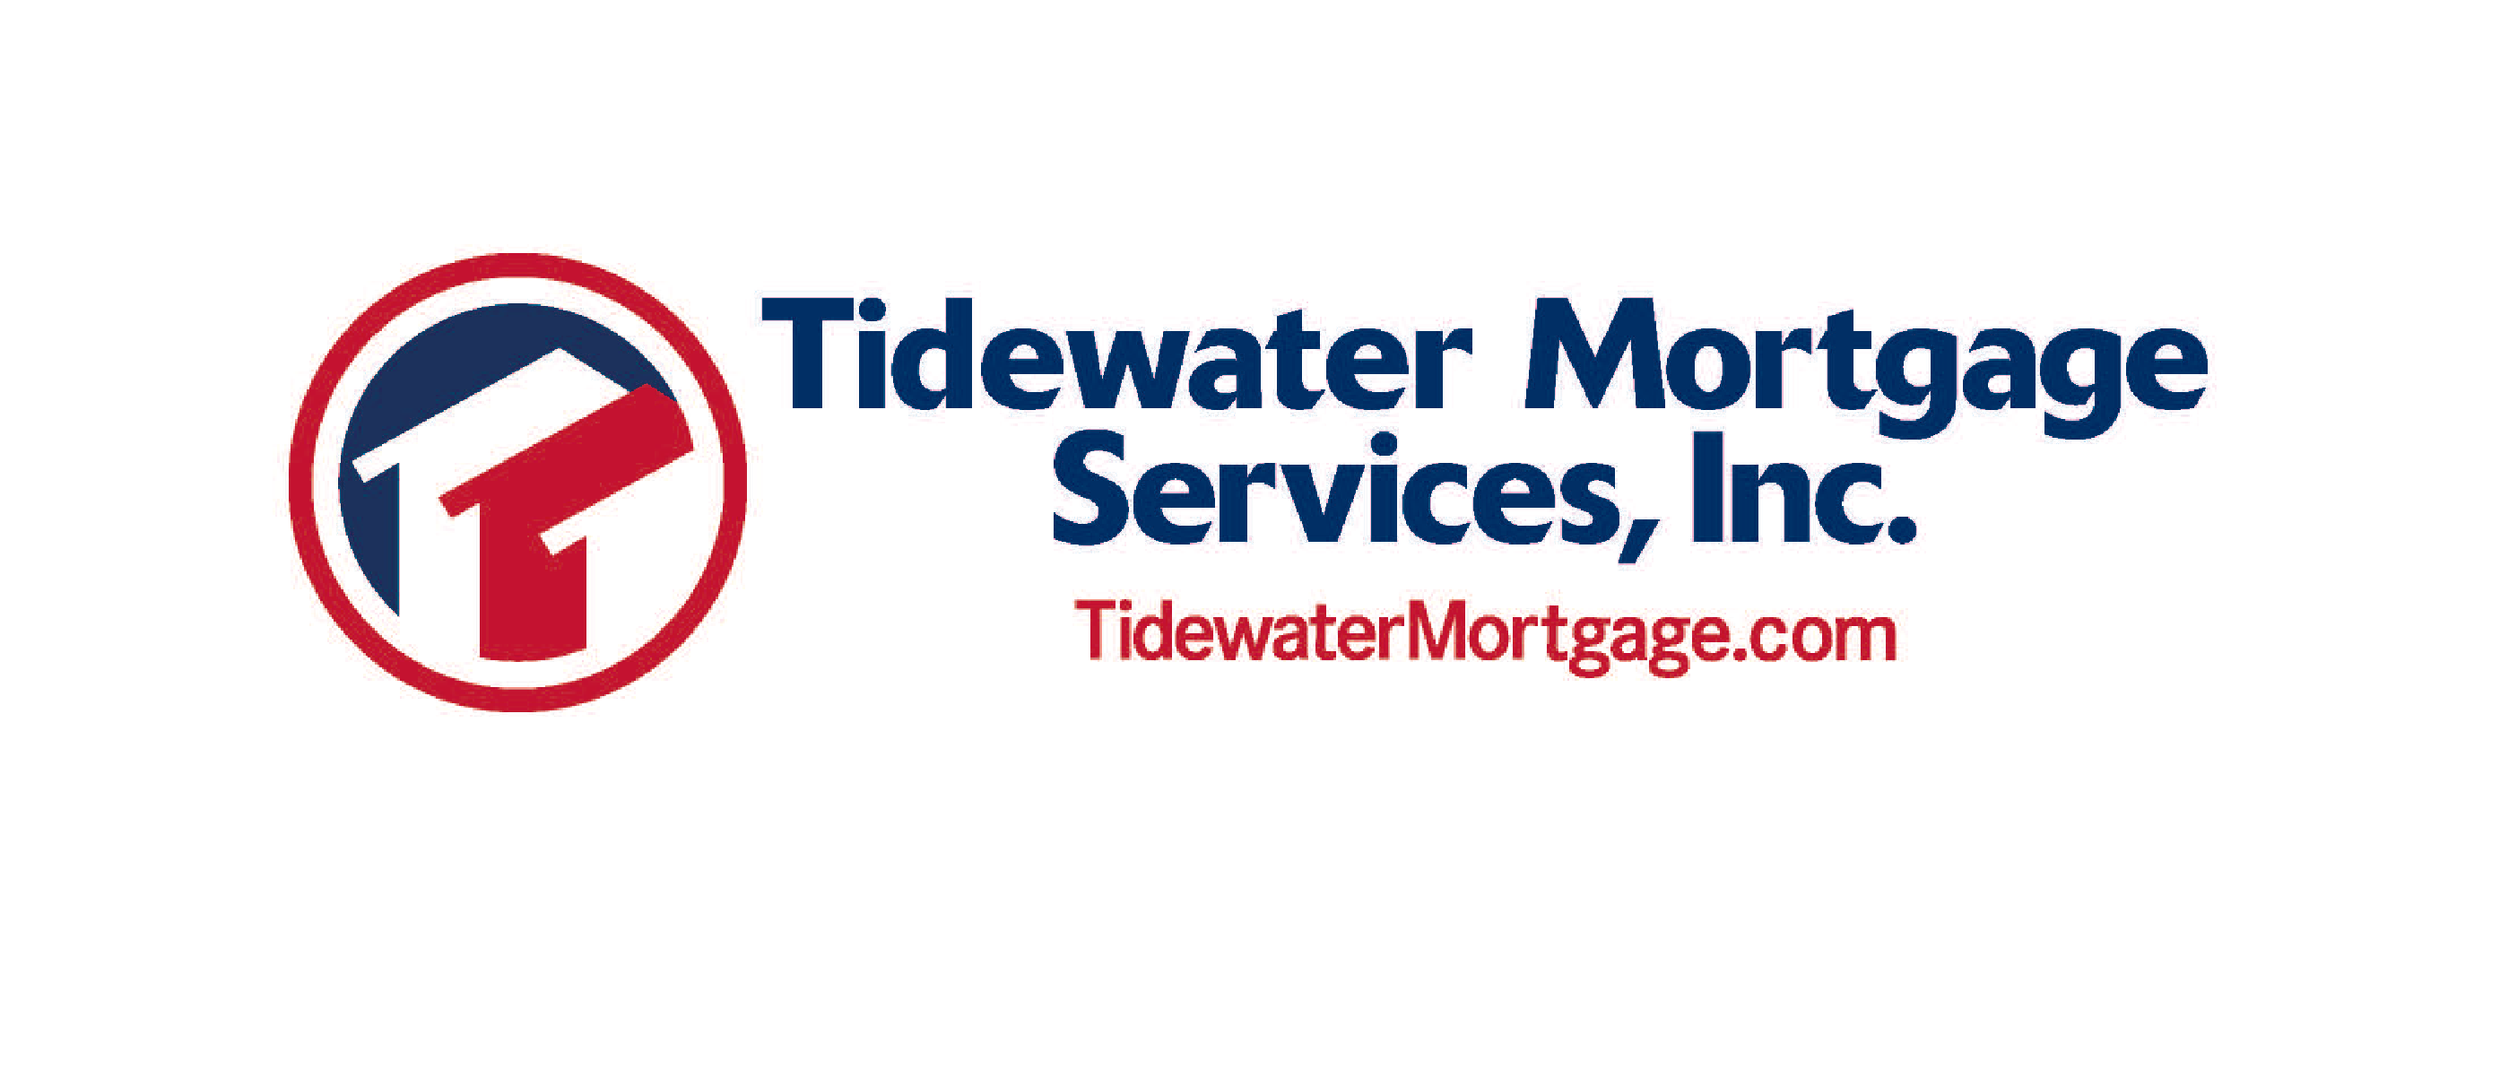 Tidewater Mortgage